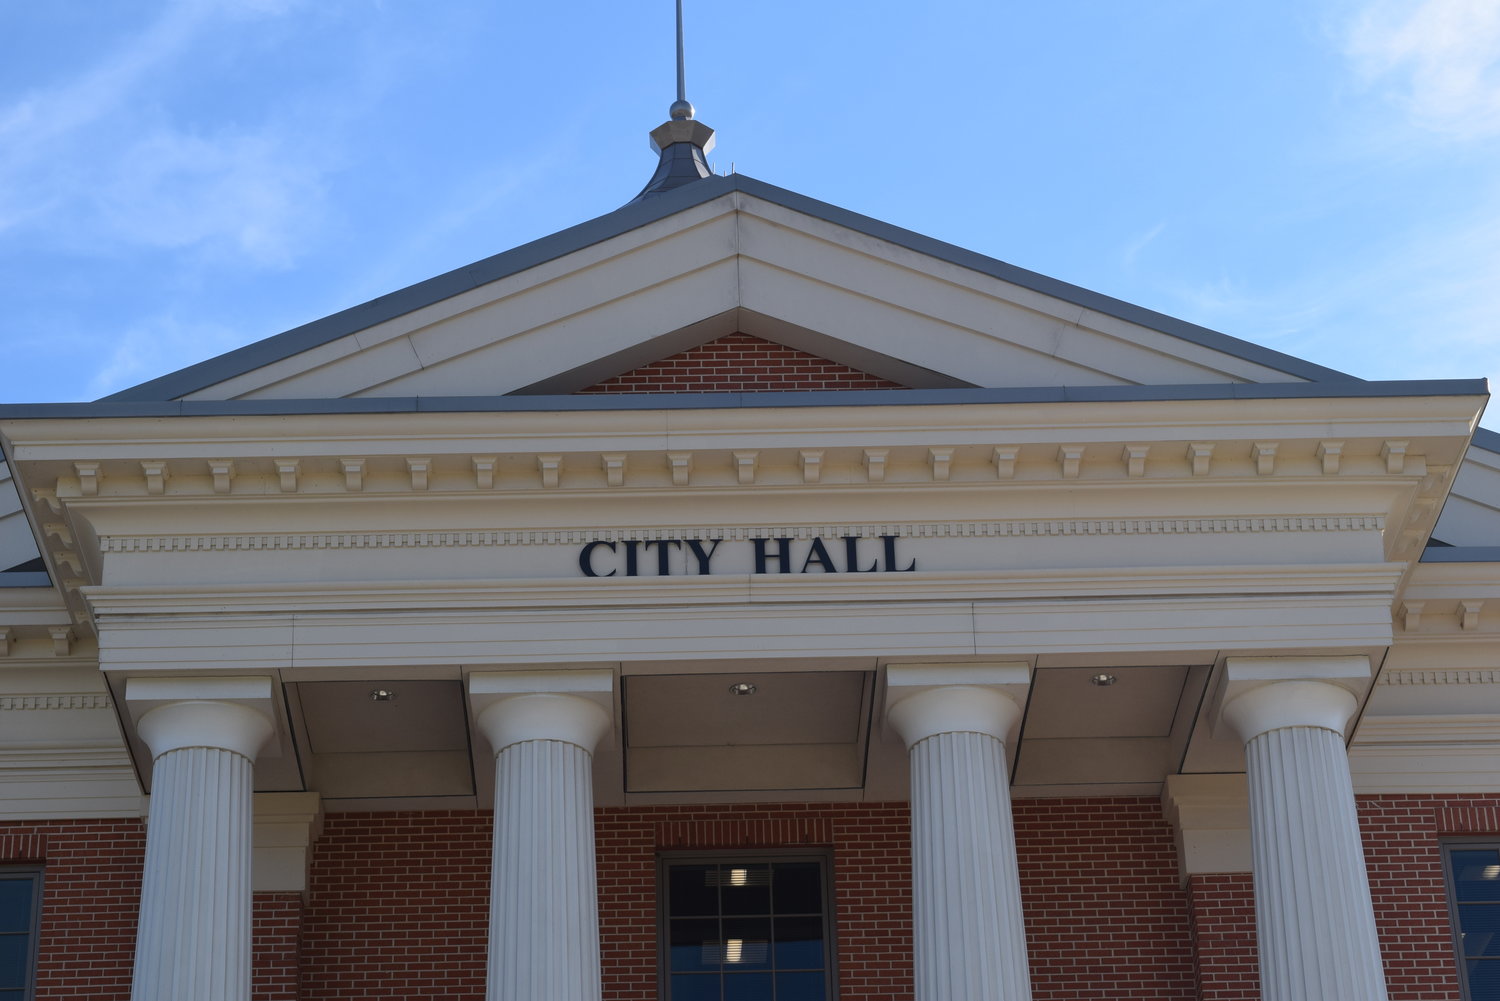 Katy City Council meets at Katy City Hall on the second and fourth Mondays of the month.